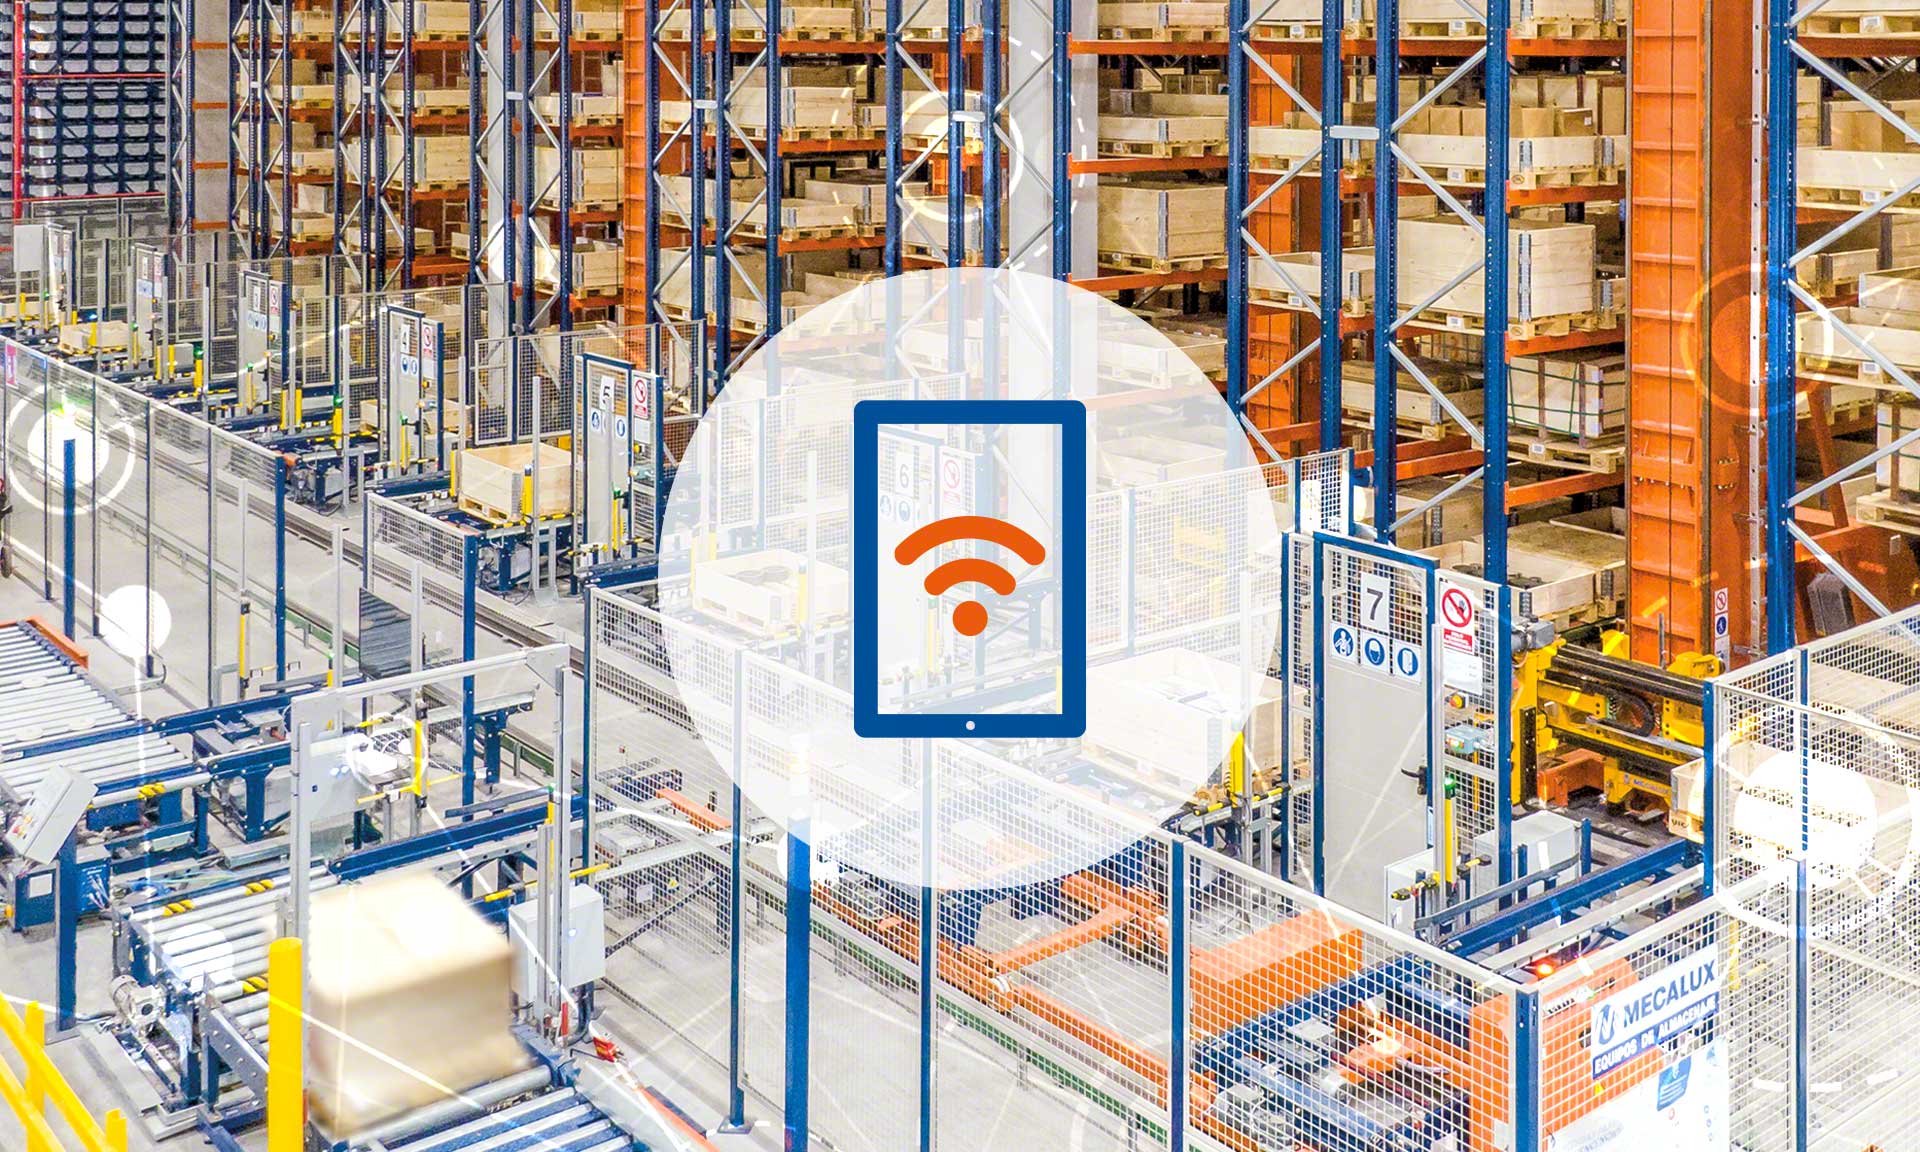 Warehouse WiFi is the wireless Ethernet technology used in logistics facilities and production centers